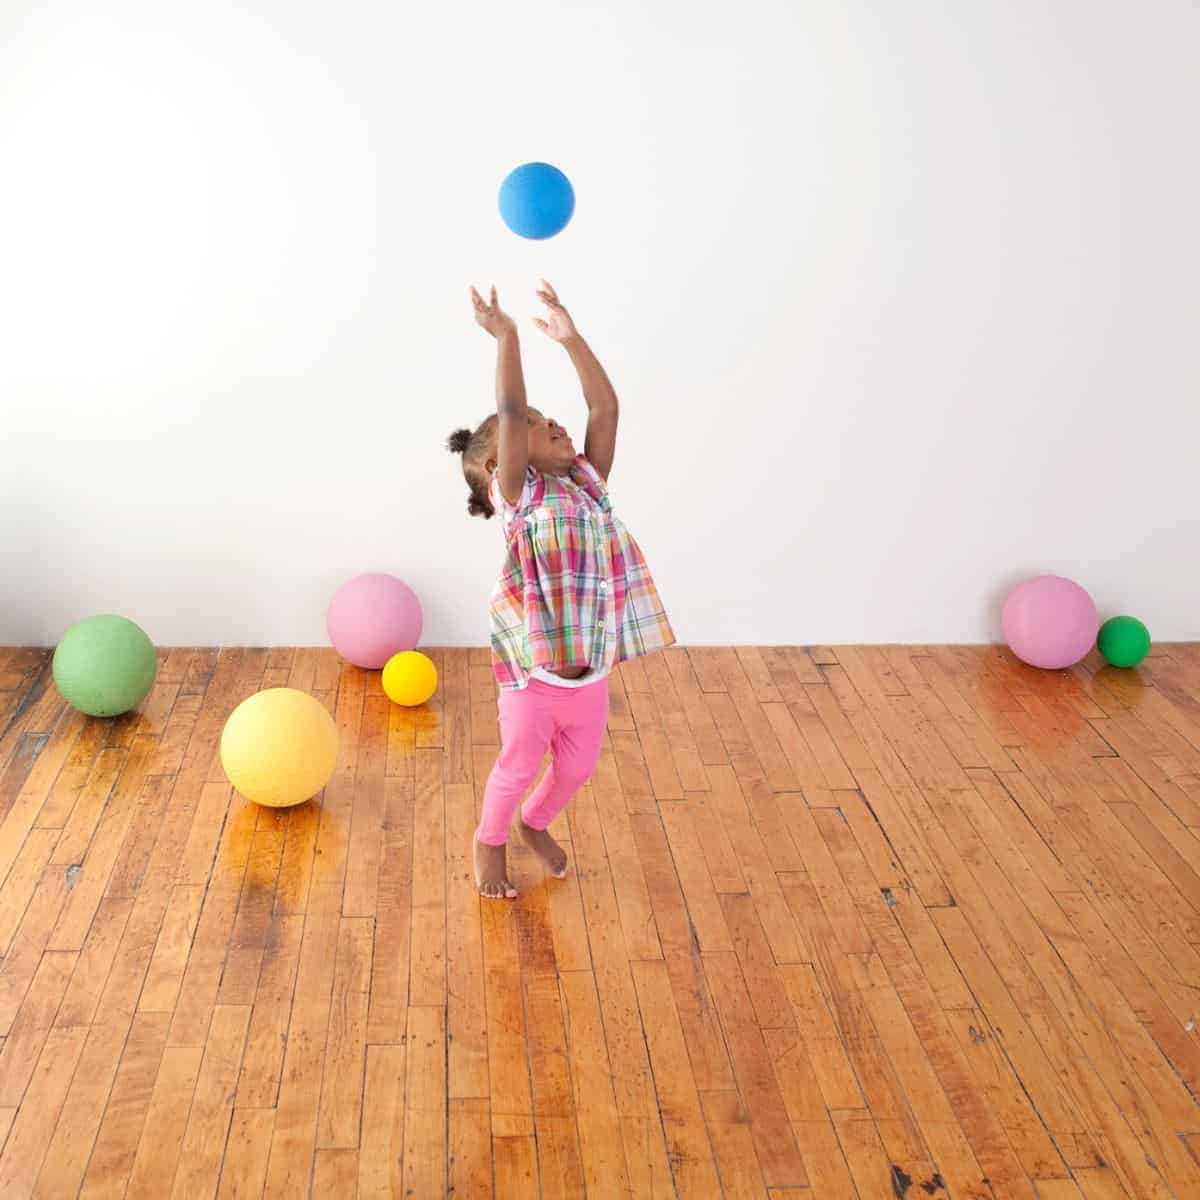 Your kids will love these gross motor skill activities, for toddlers, preschoolers, kindergarten or school aged. Plus, benefits of gross motor activities. Tons of ideas to try for large motor!